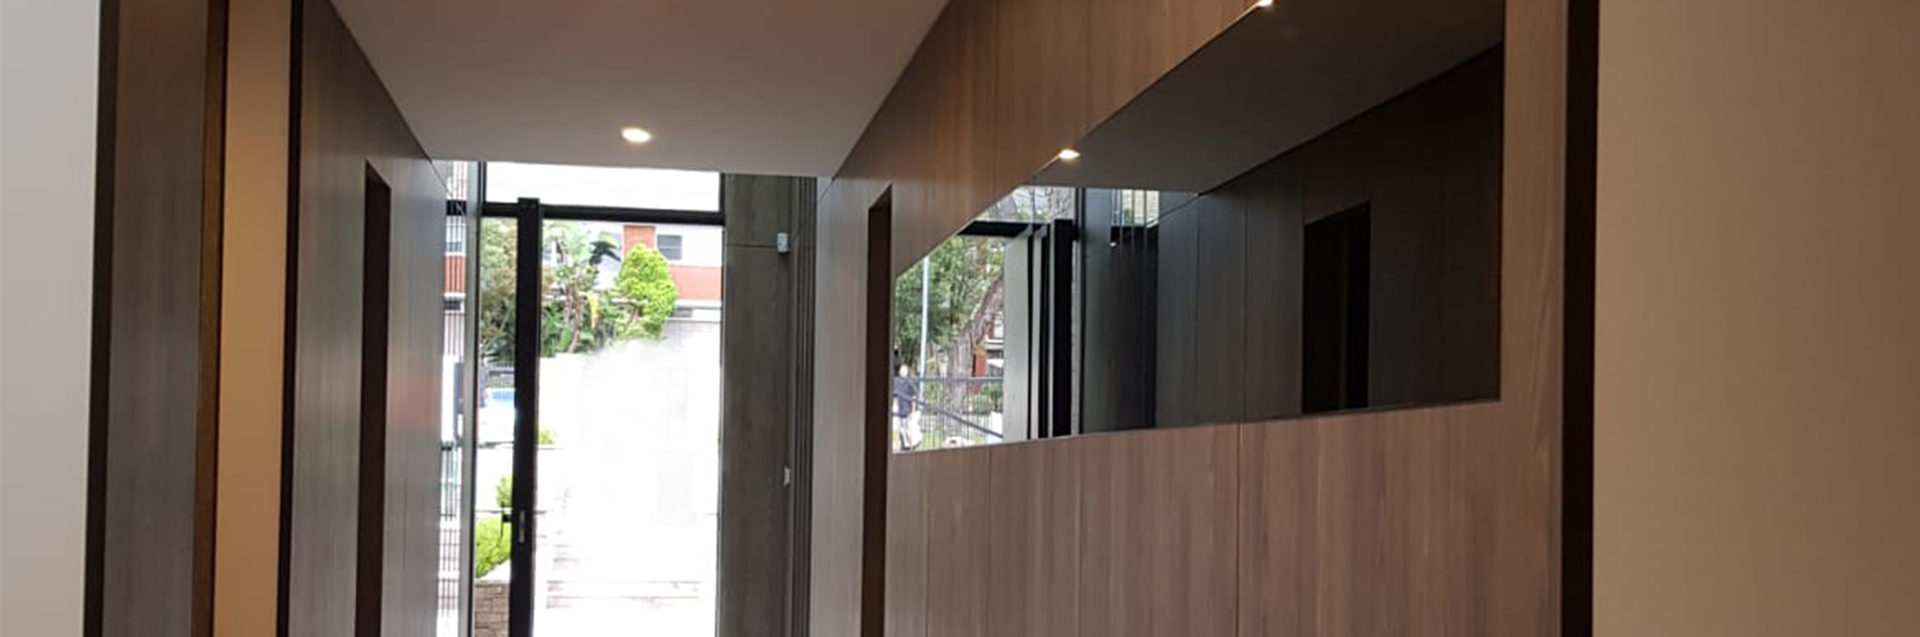 Scarelli Joinery Project - Double Bay Sydney Residential - Large